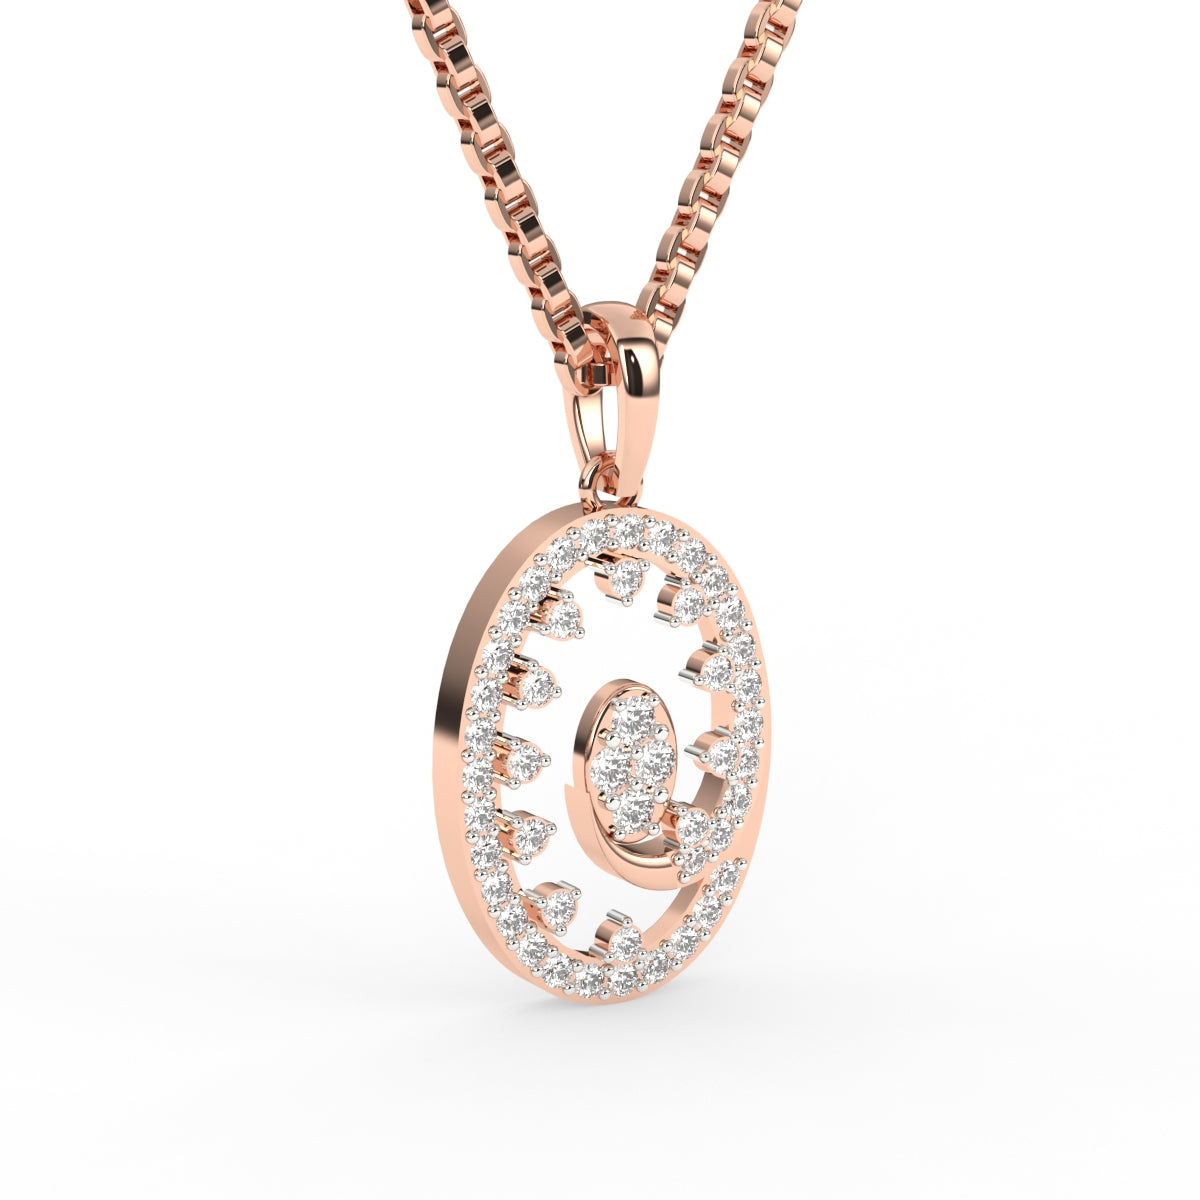 Sparkling Oval Shaped Pendant